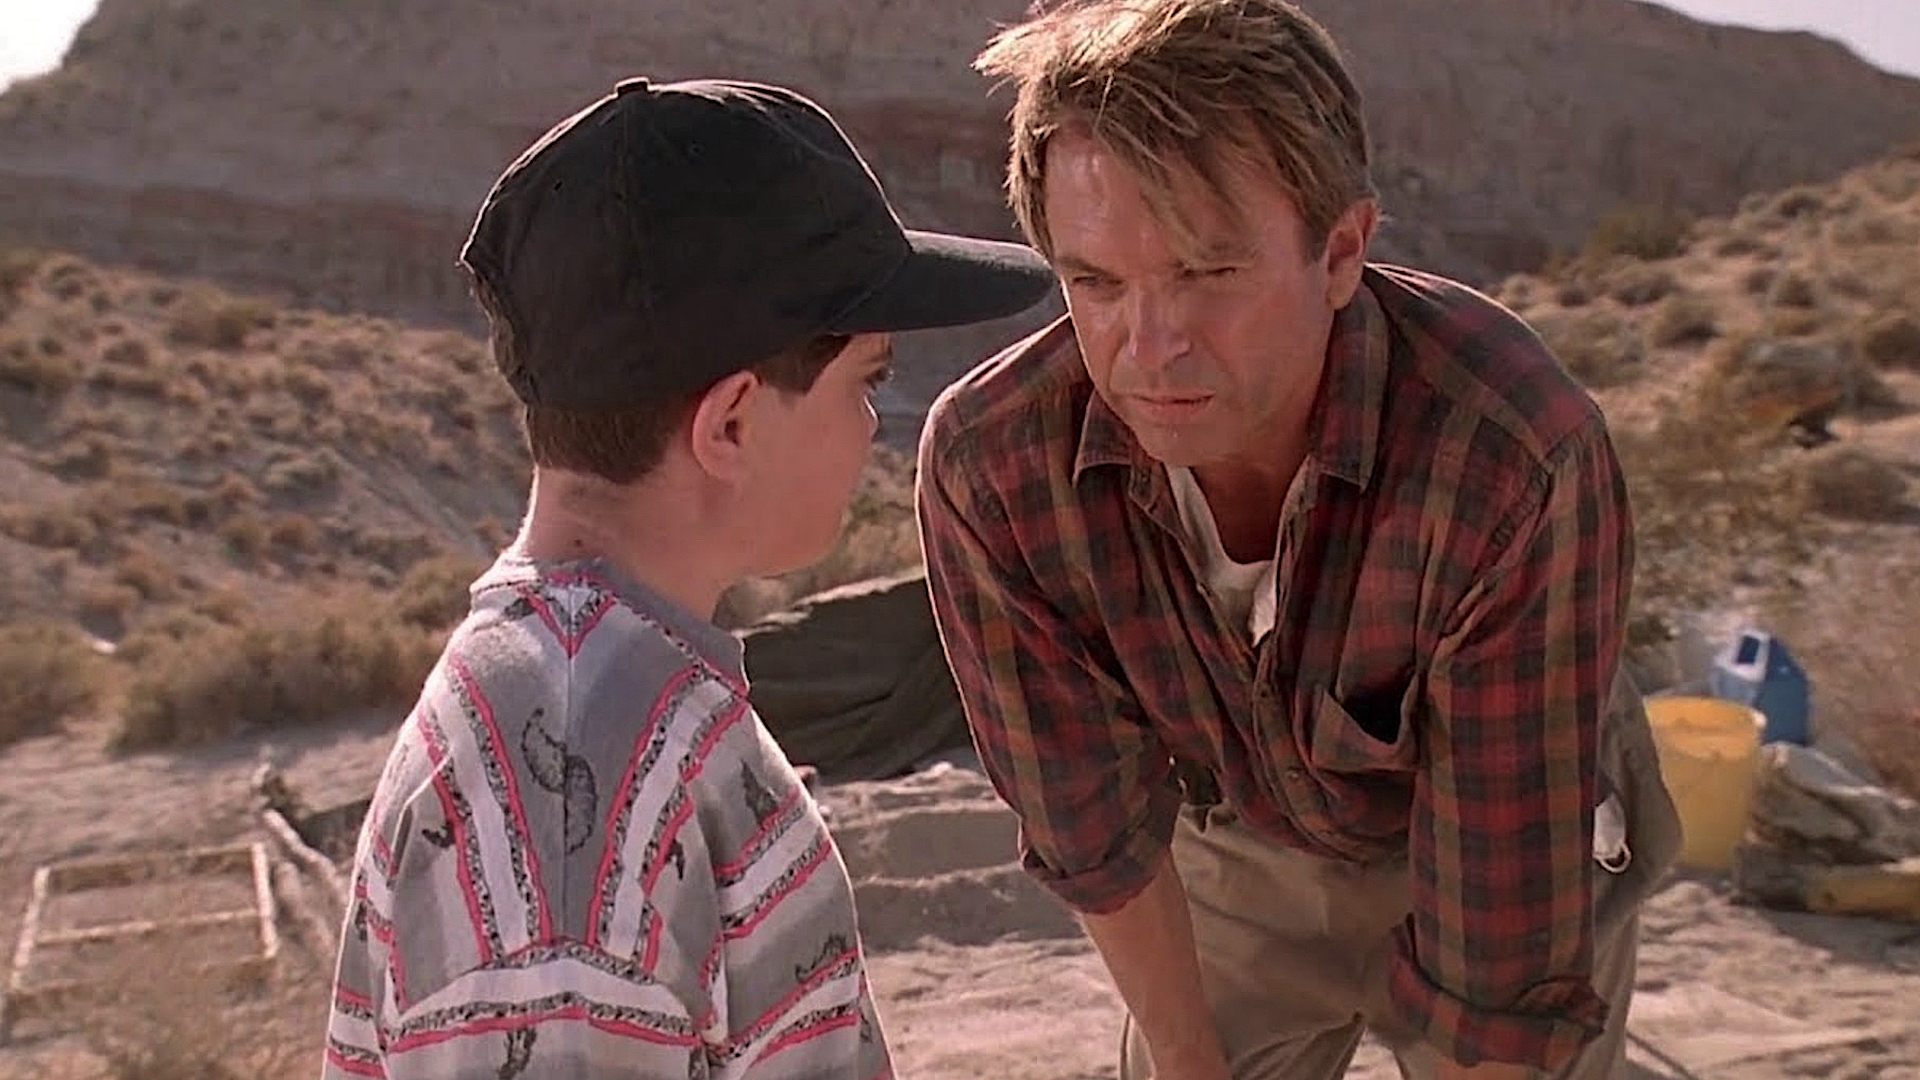 Sam Neill lectures obnoxious kid in Jurassic Park